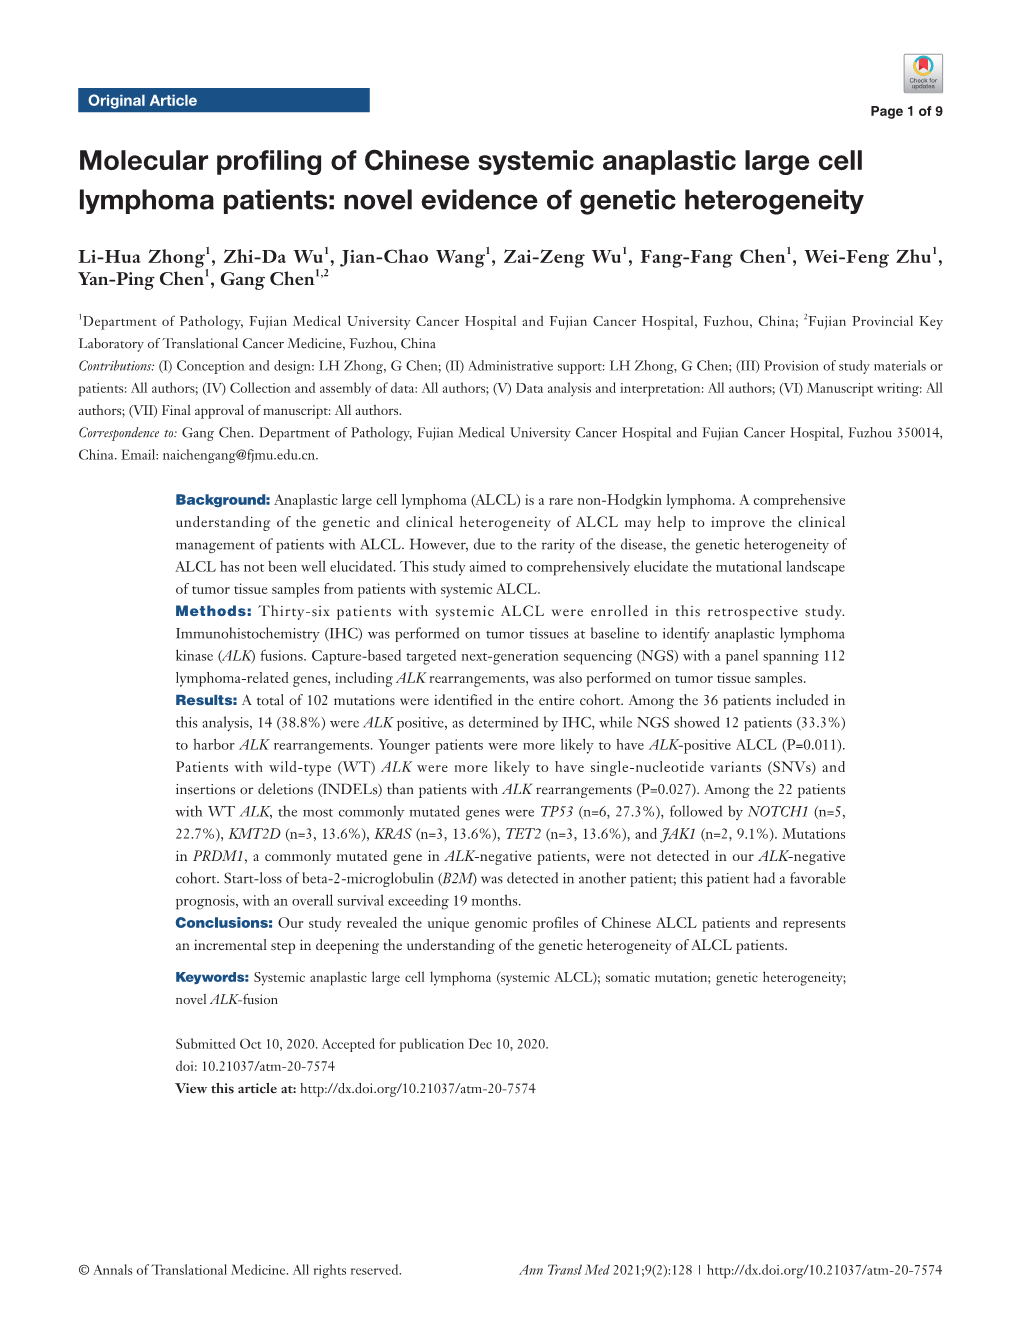 Molecular Profiling of Chinese Systemic Anaplastic Large Cell Lymphoma Patients: Novel Evidence of Genetic Heterogeneity